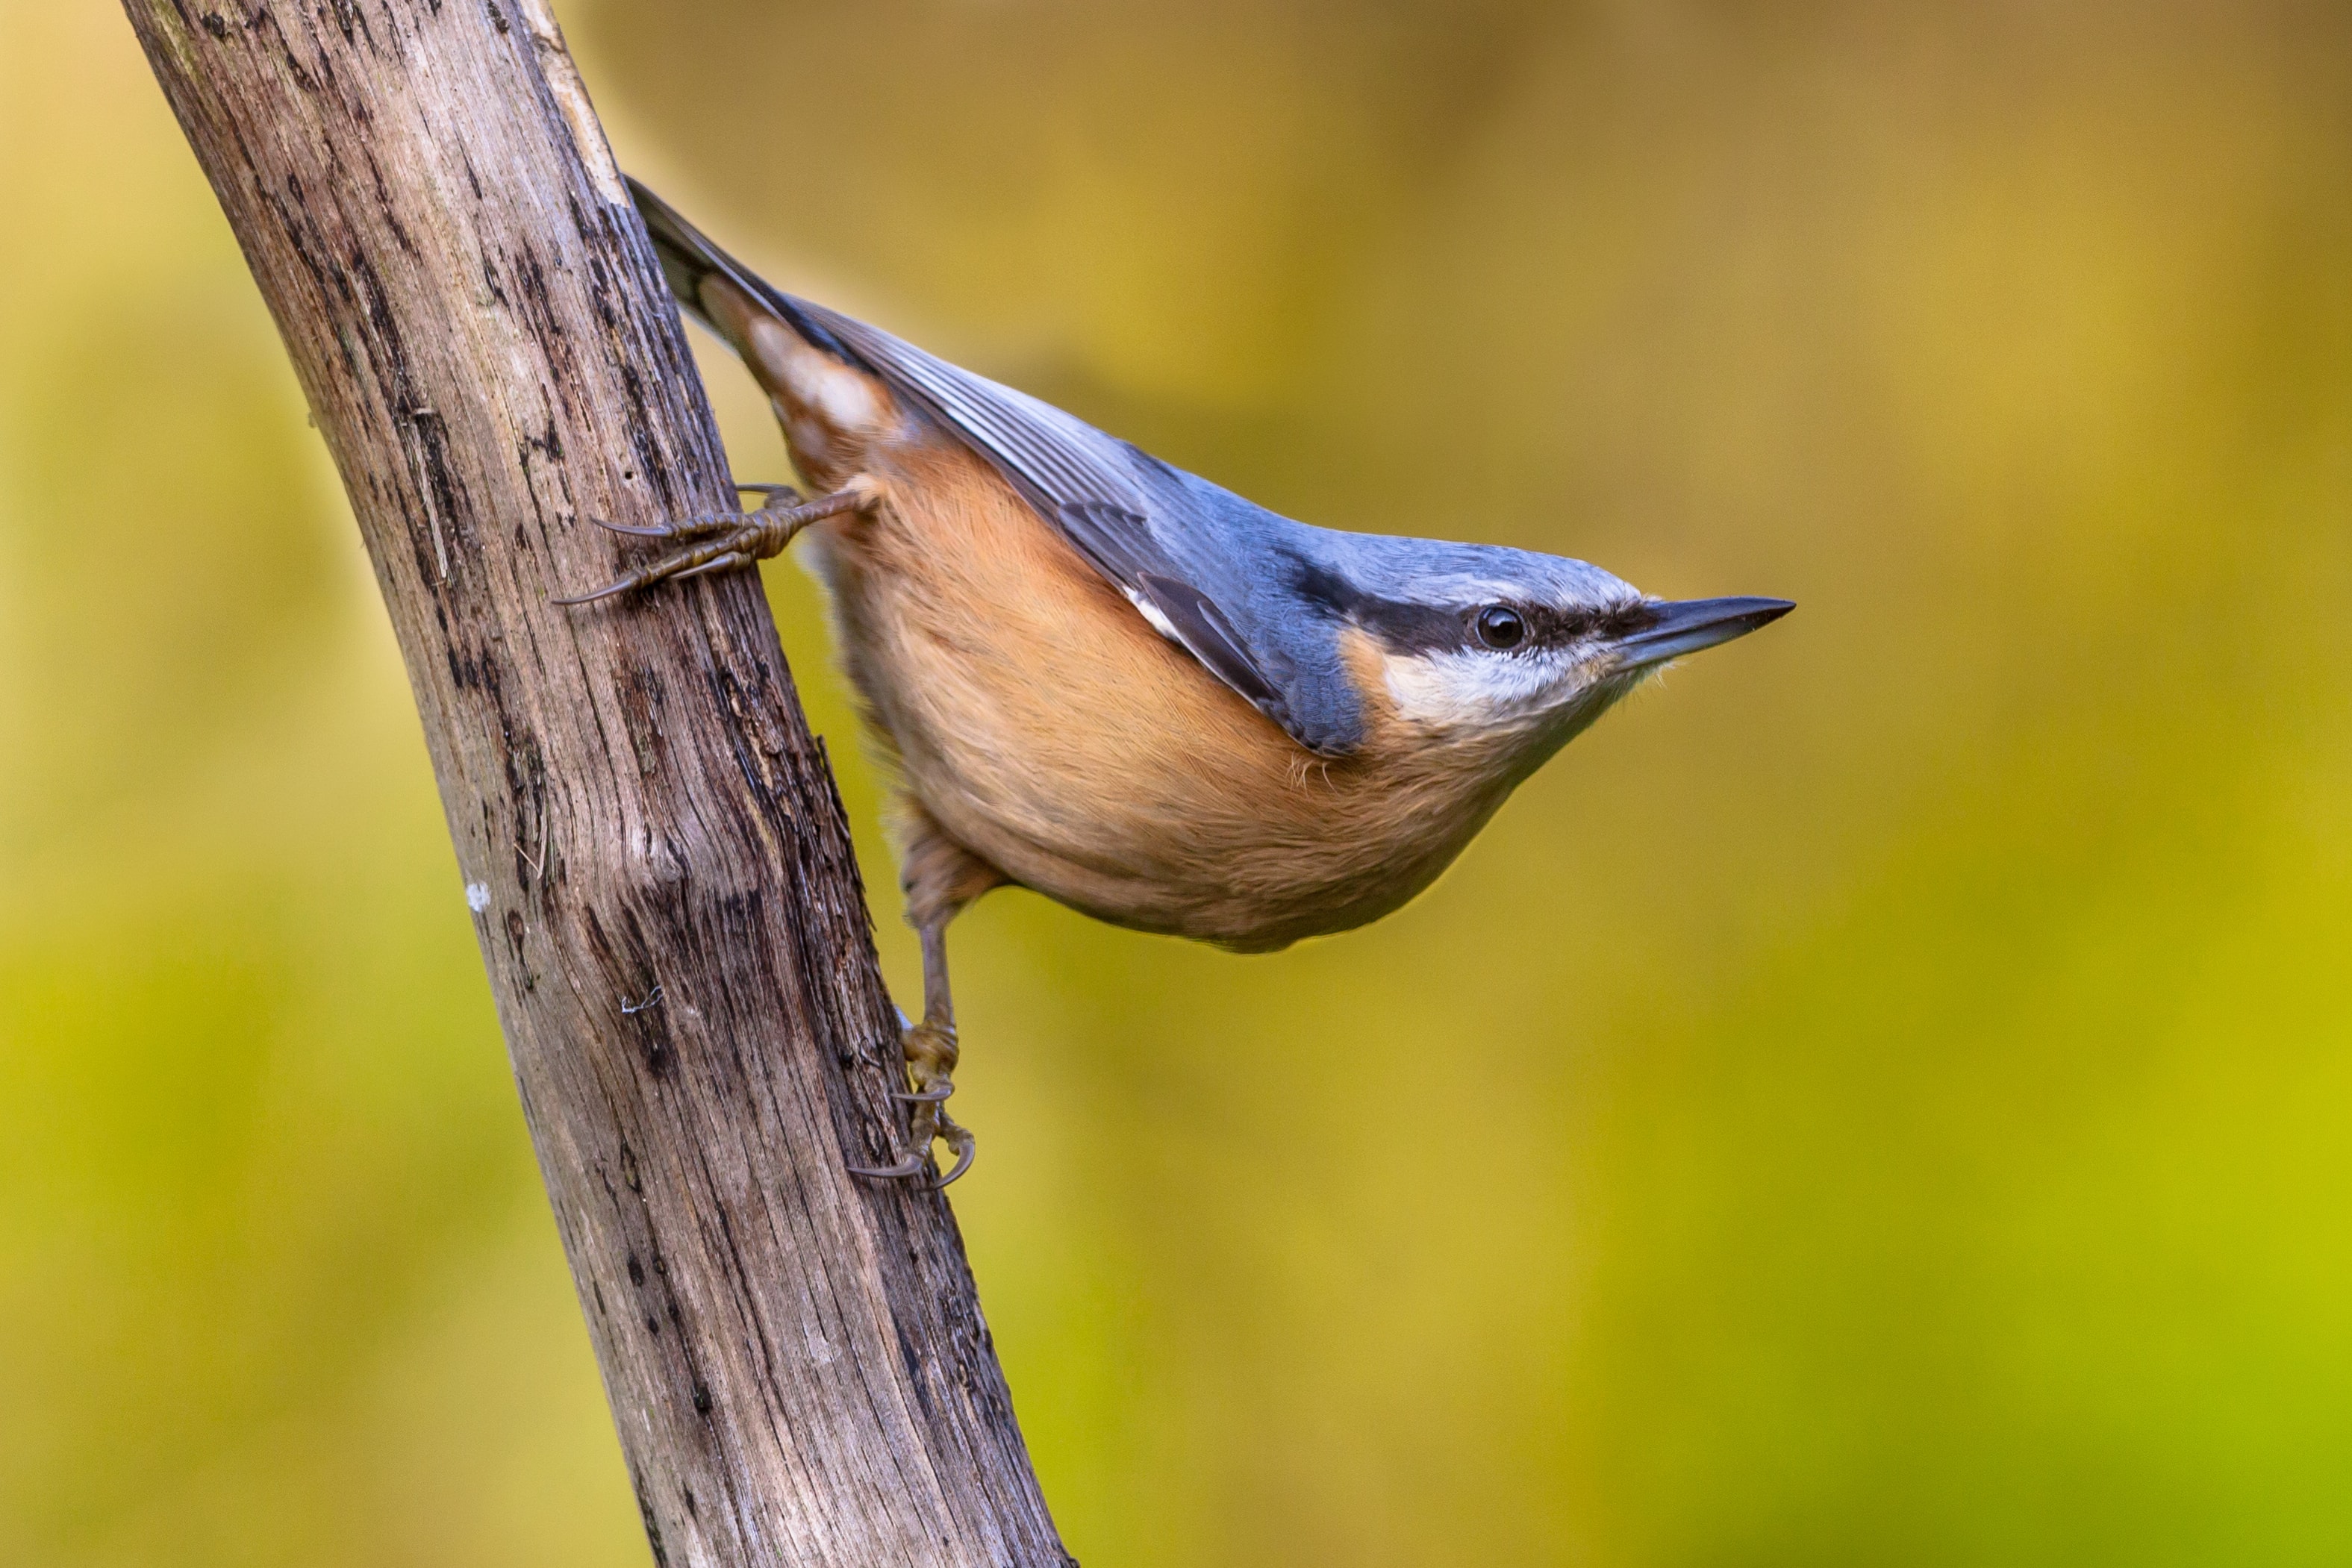 (Getty Images) Nuthatch in garden